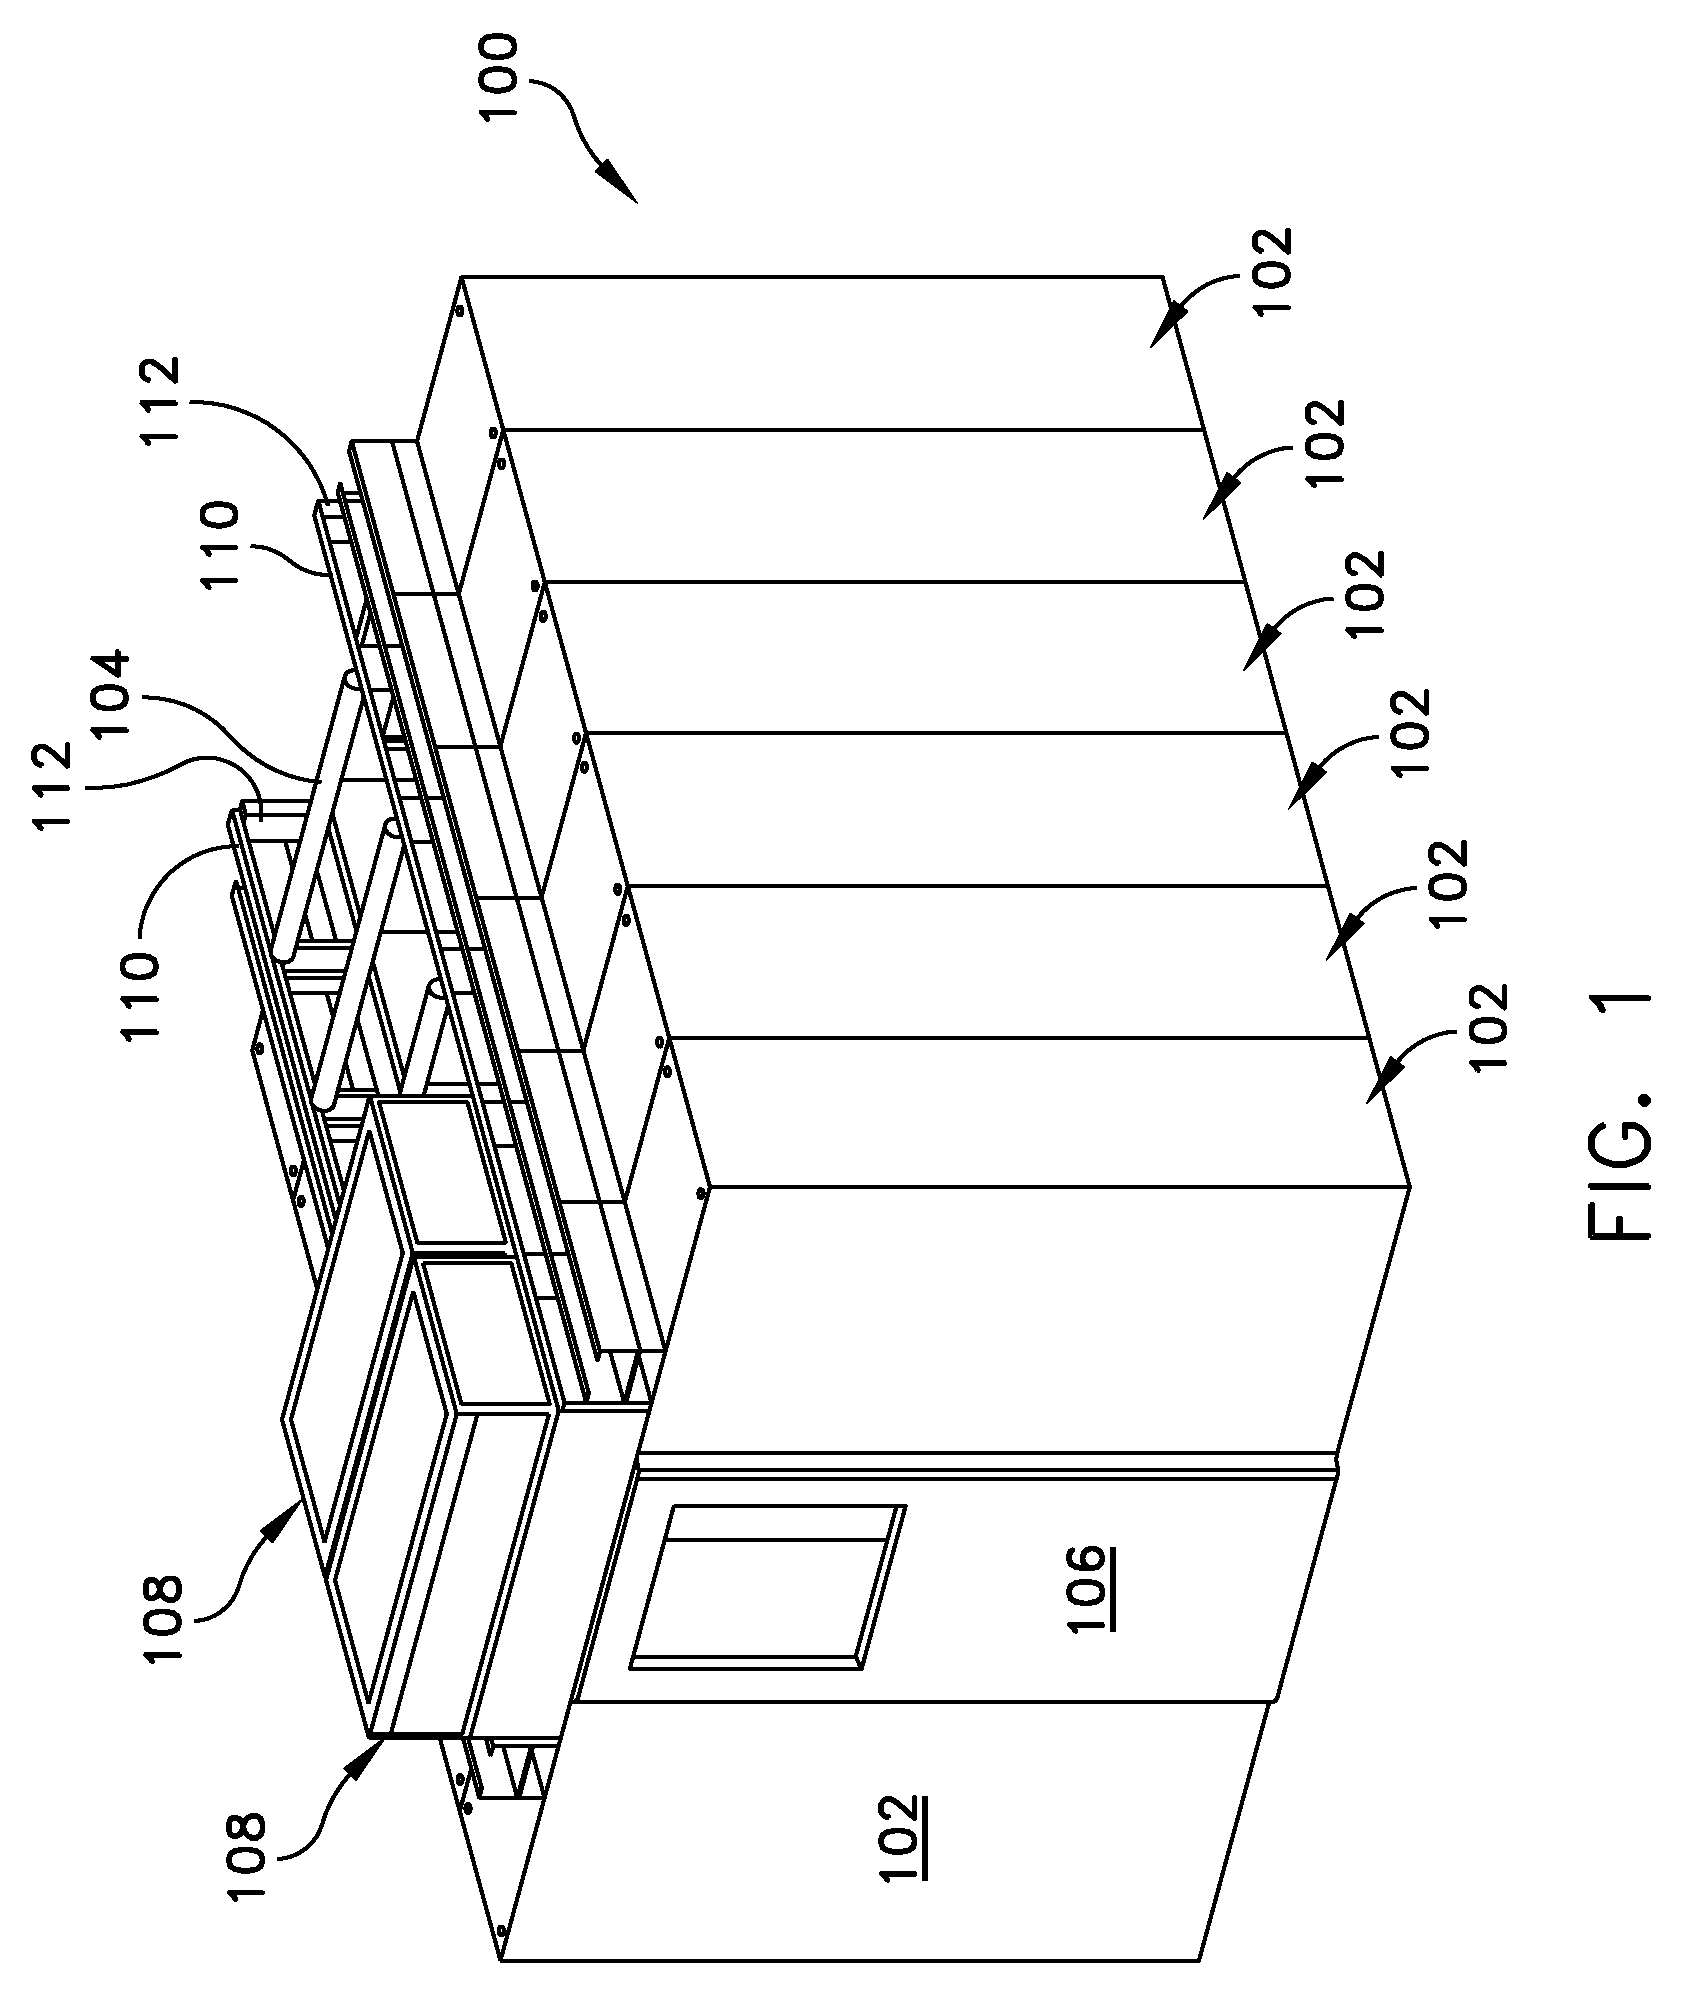 Hot aisle containment cooling unit and method for cooling